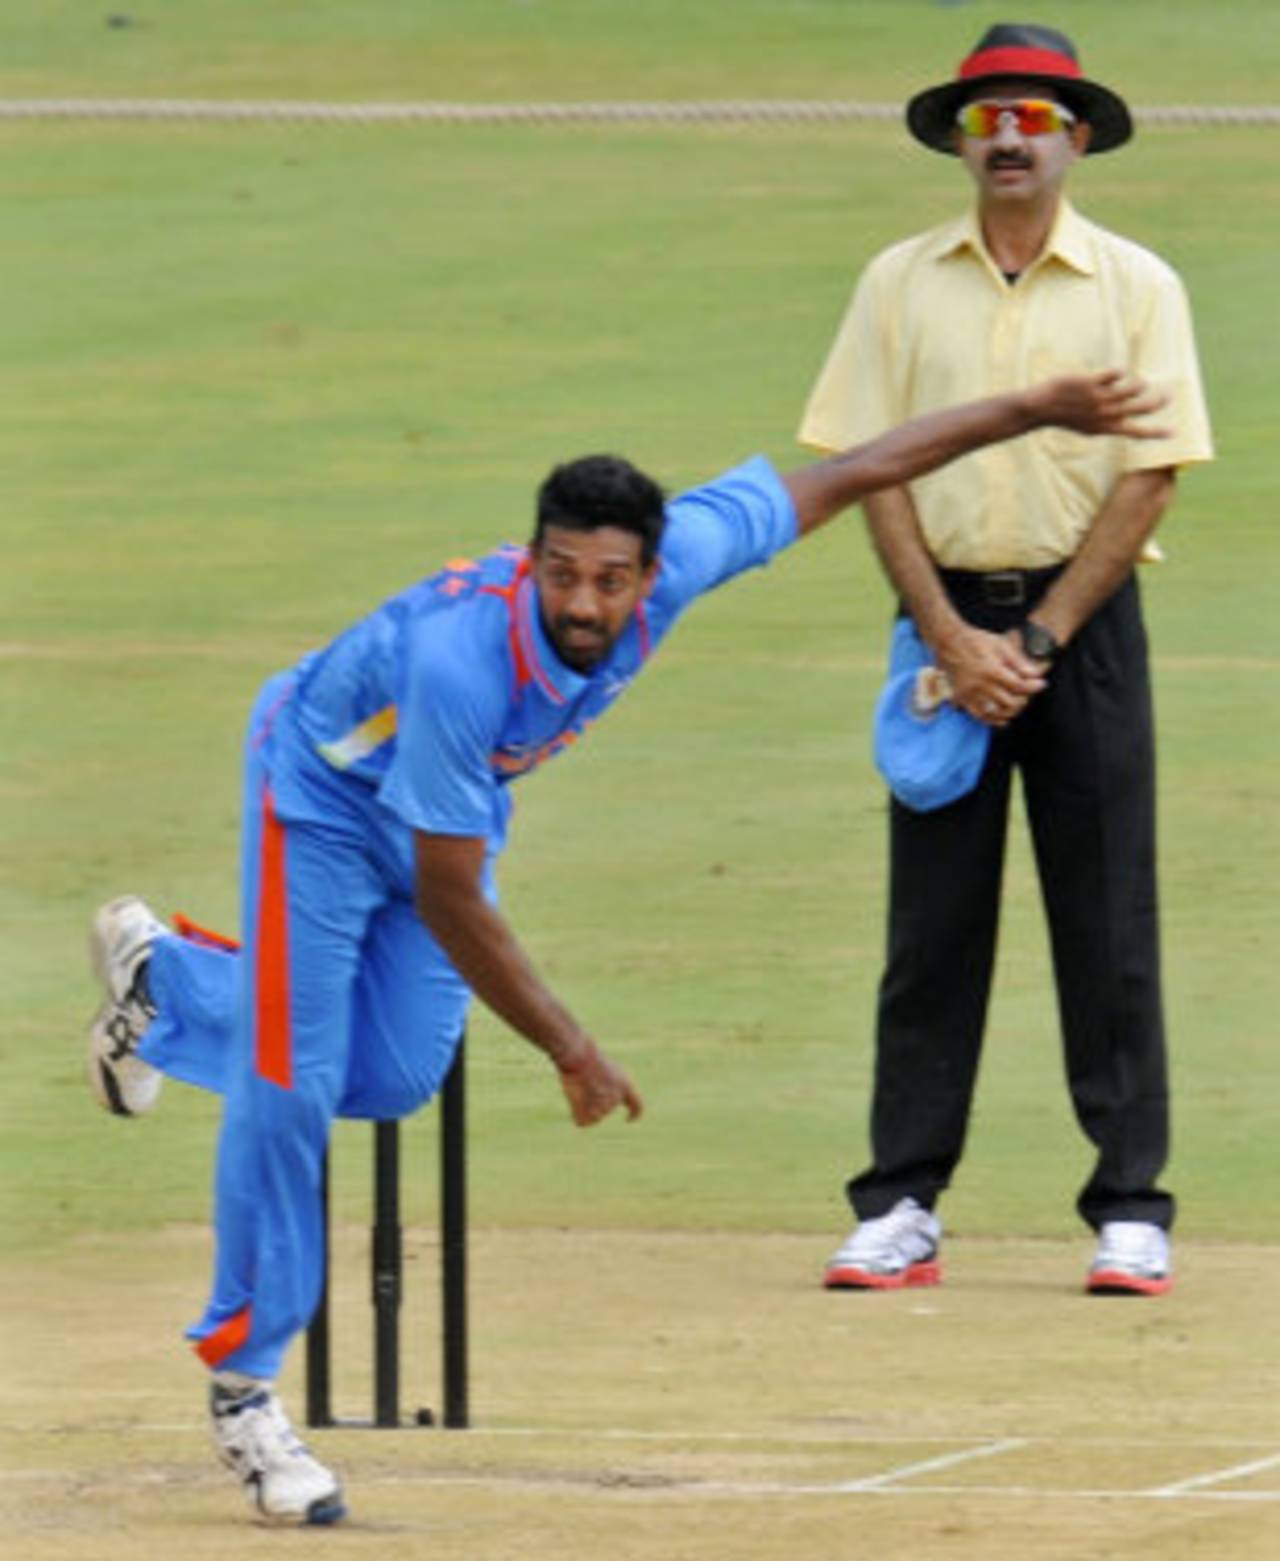 Two days after he earned a maiden, national limited-overs call-up, Dhawal Kulkarni has been ruled out&nbsp;&nbsp;&bull;&nbsp;&nbsp;BCCI